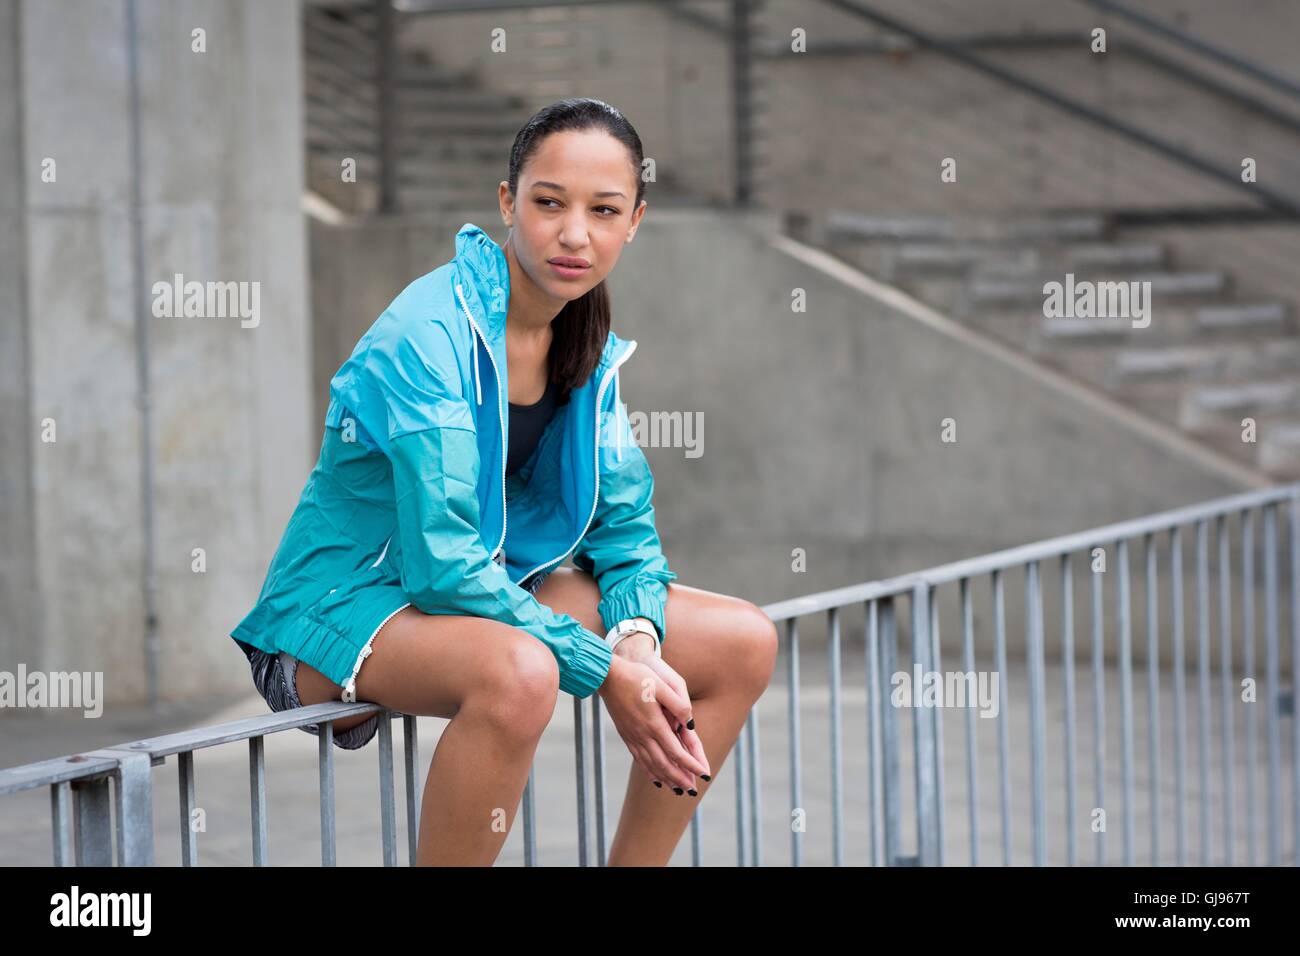 MODEL RELEASED. Portrait of young woman sitting on railings looking away. Stock Photo